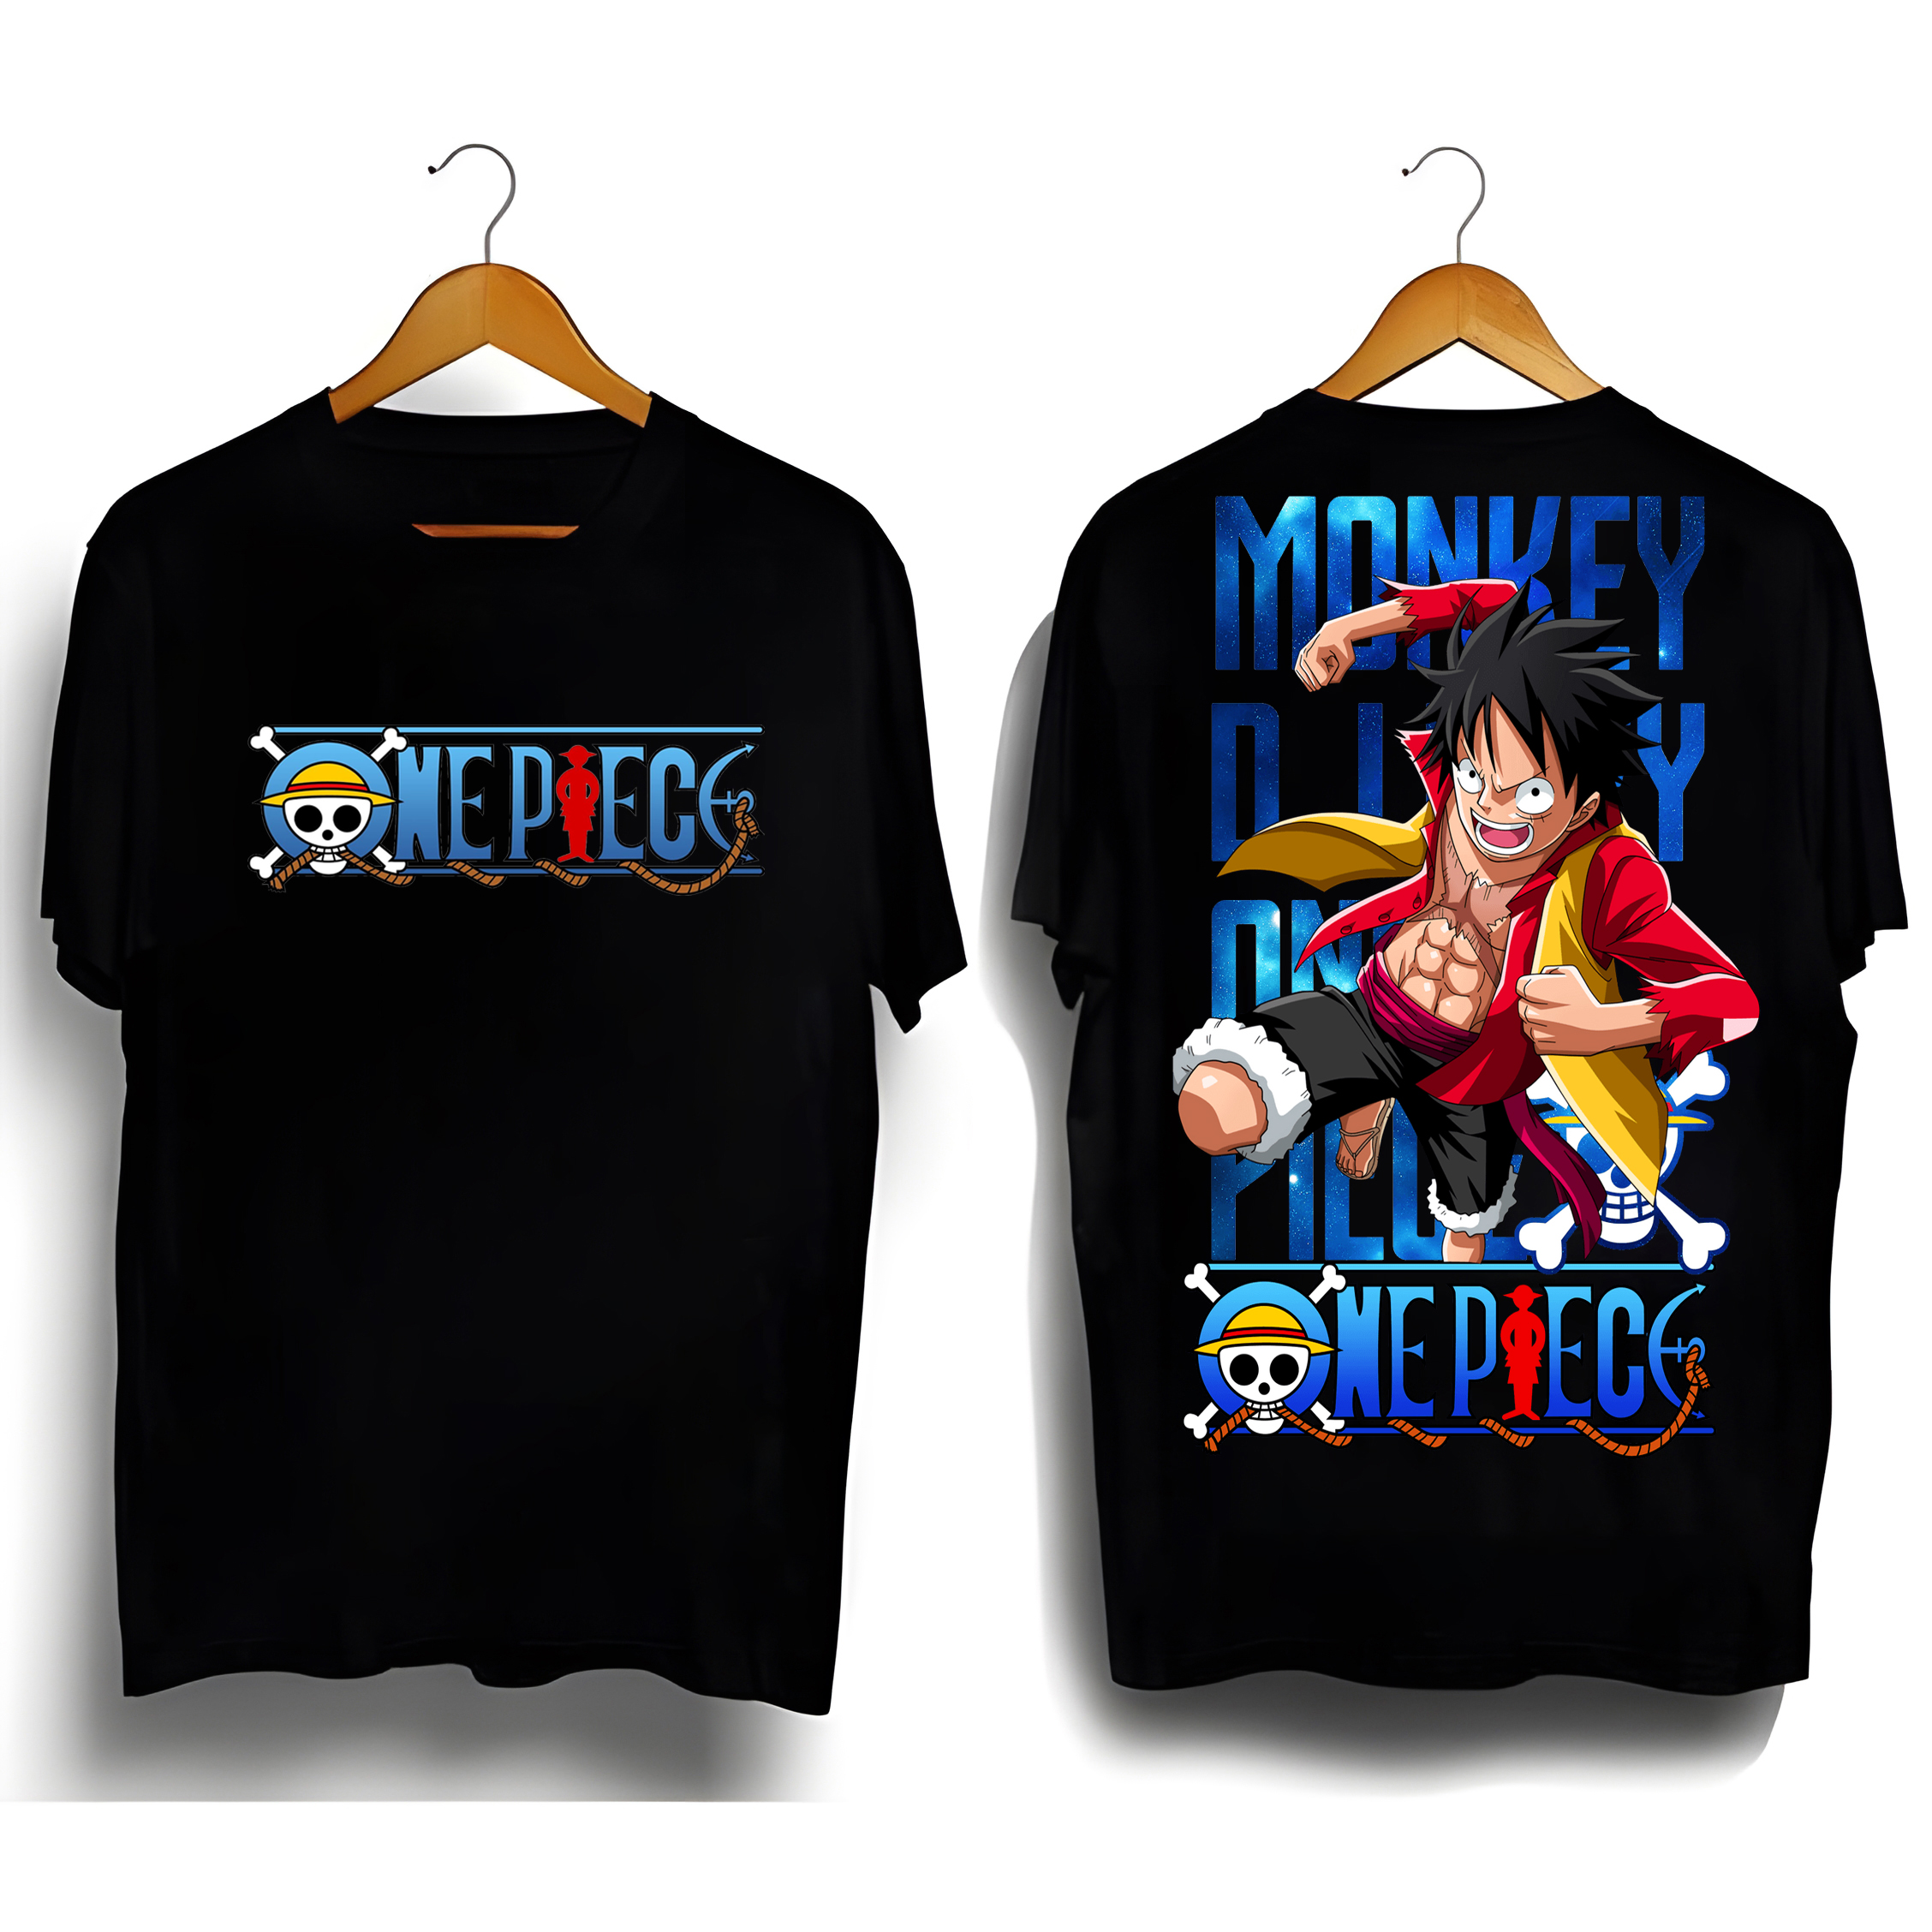 ONE PIECE MECHA LUFFY Design T-shirt with DTF (Direct to Film) Anime  Knockout Black Print, Rubberized Quality, Plain, 80% Cotton 20% Polyester,  Crew / Round Neck for Casual unisex wear, fit for